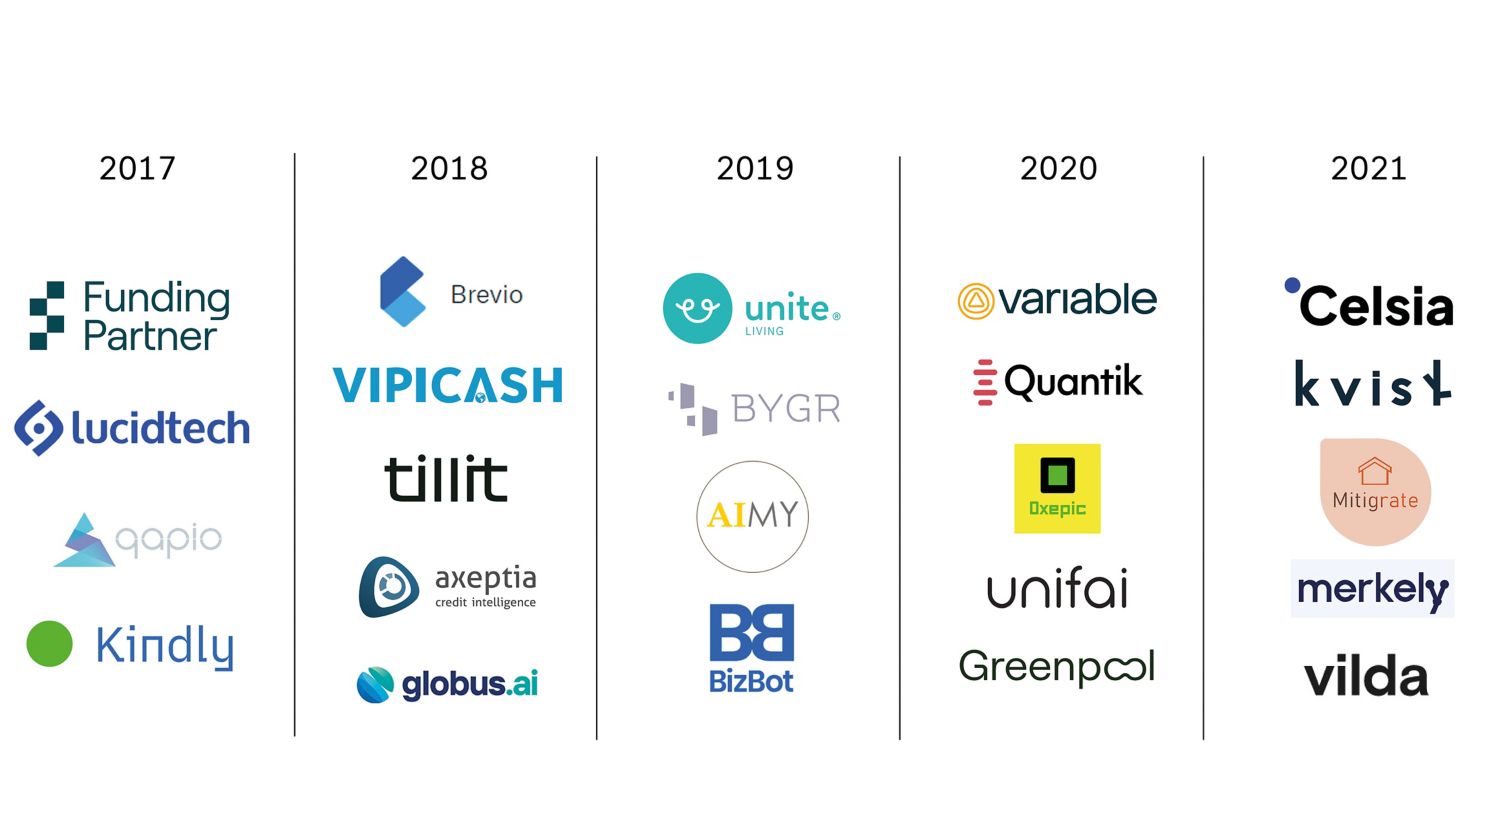 Image of the logos of all alumni companies from 2017 to 2021.